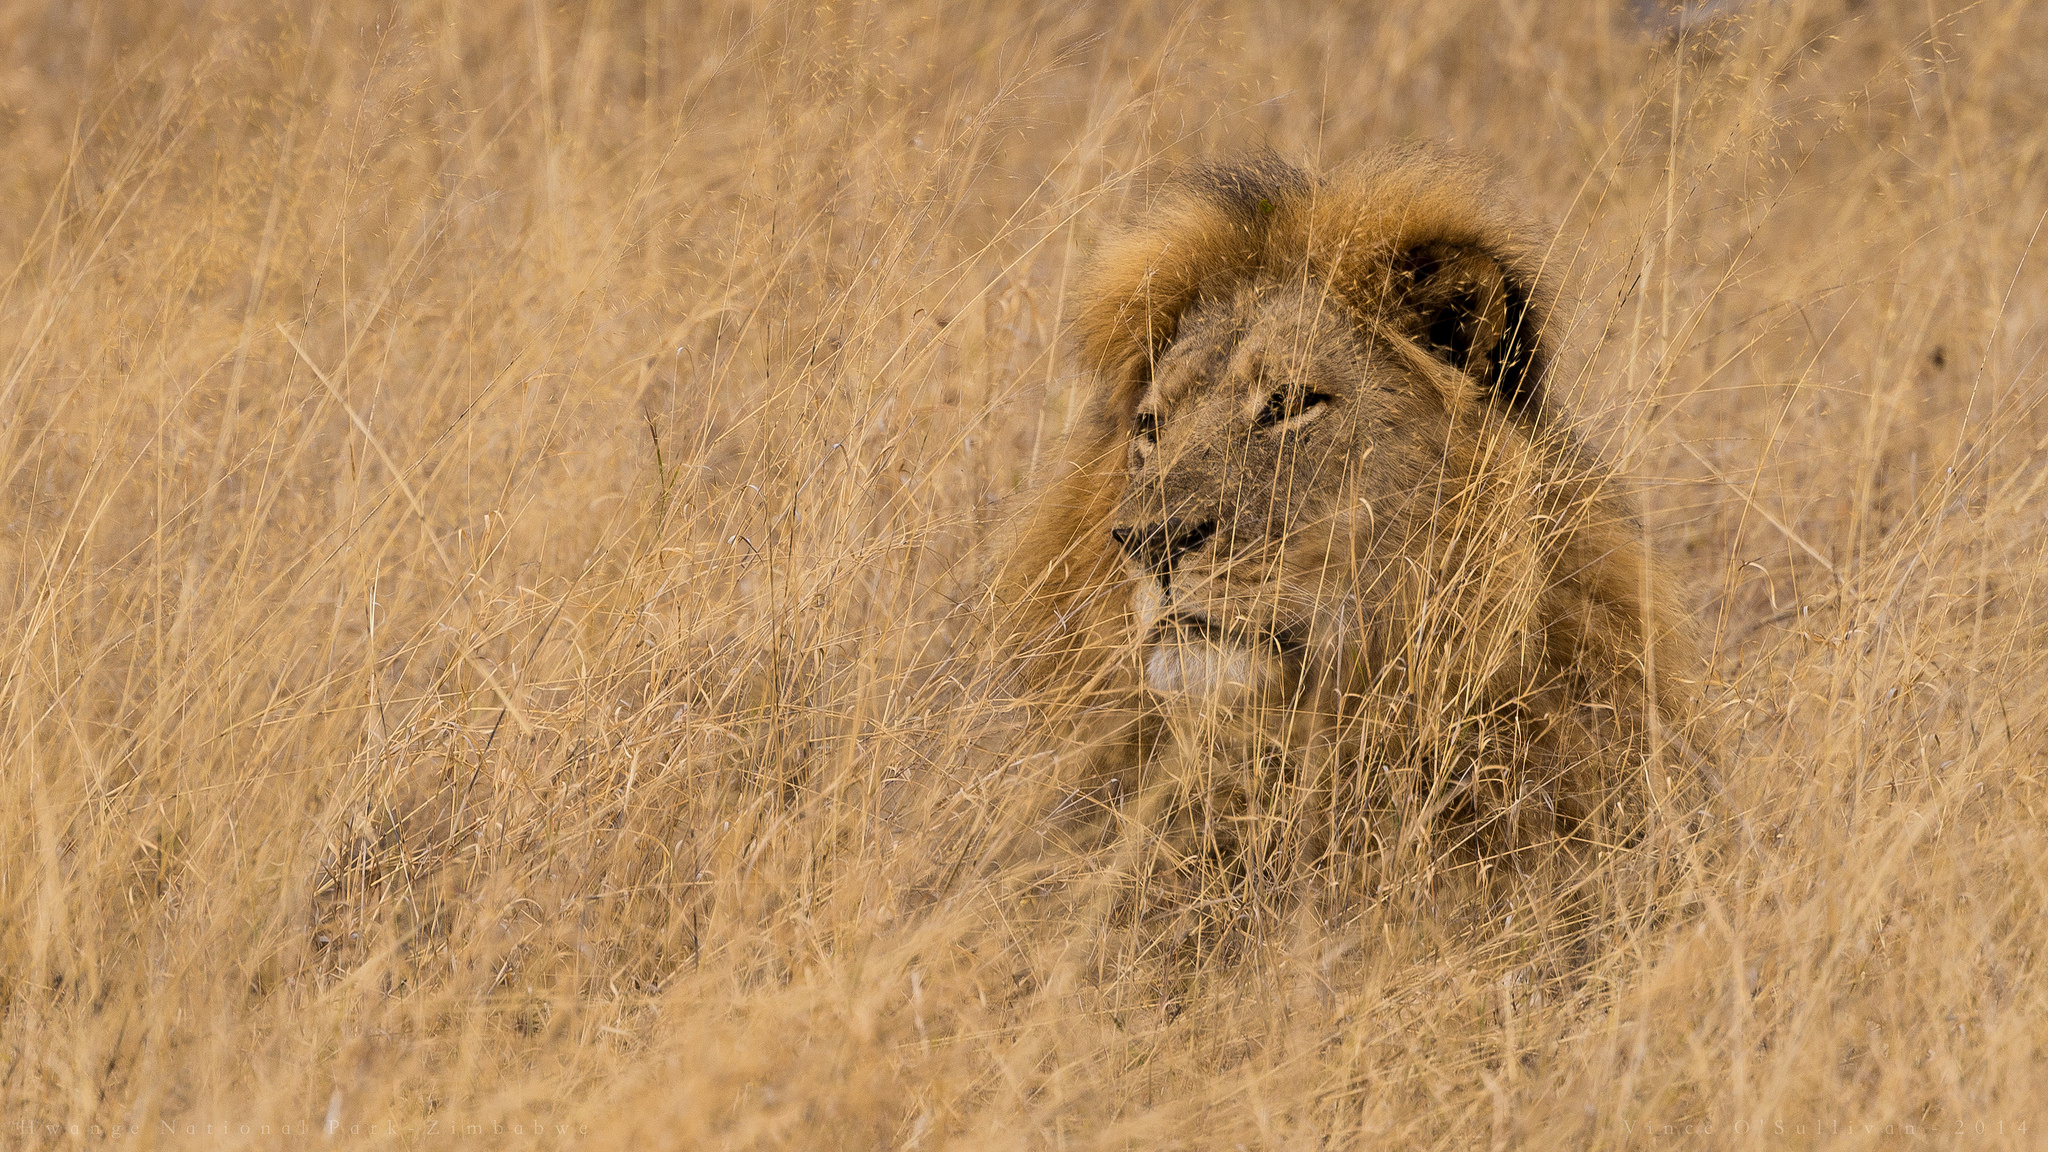 Death Of Cecil The Lion And The Path To Healing